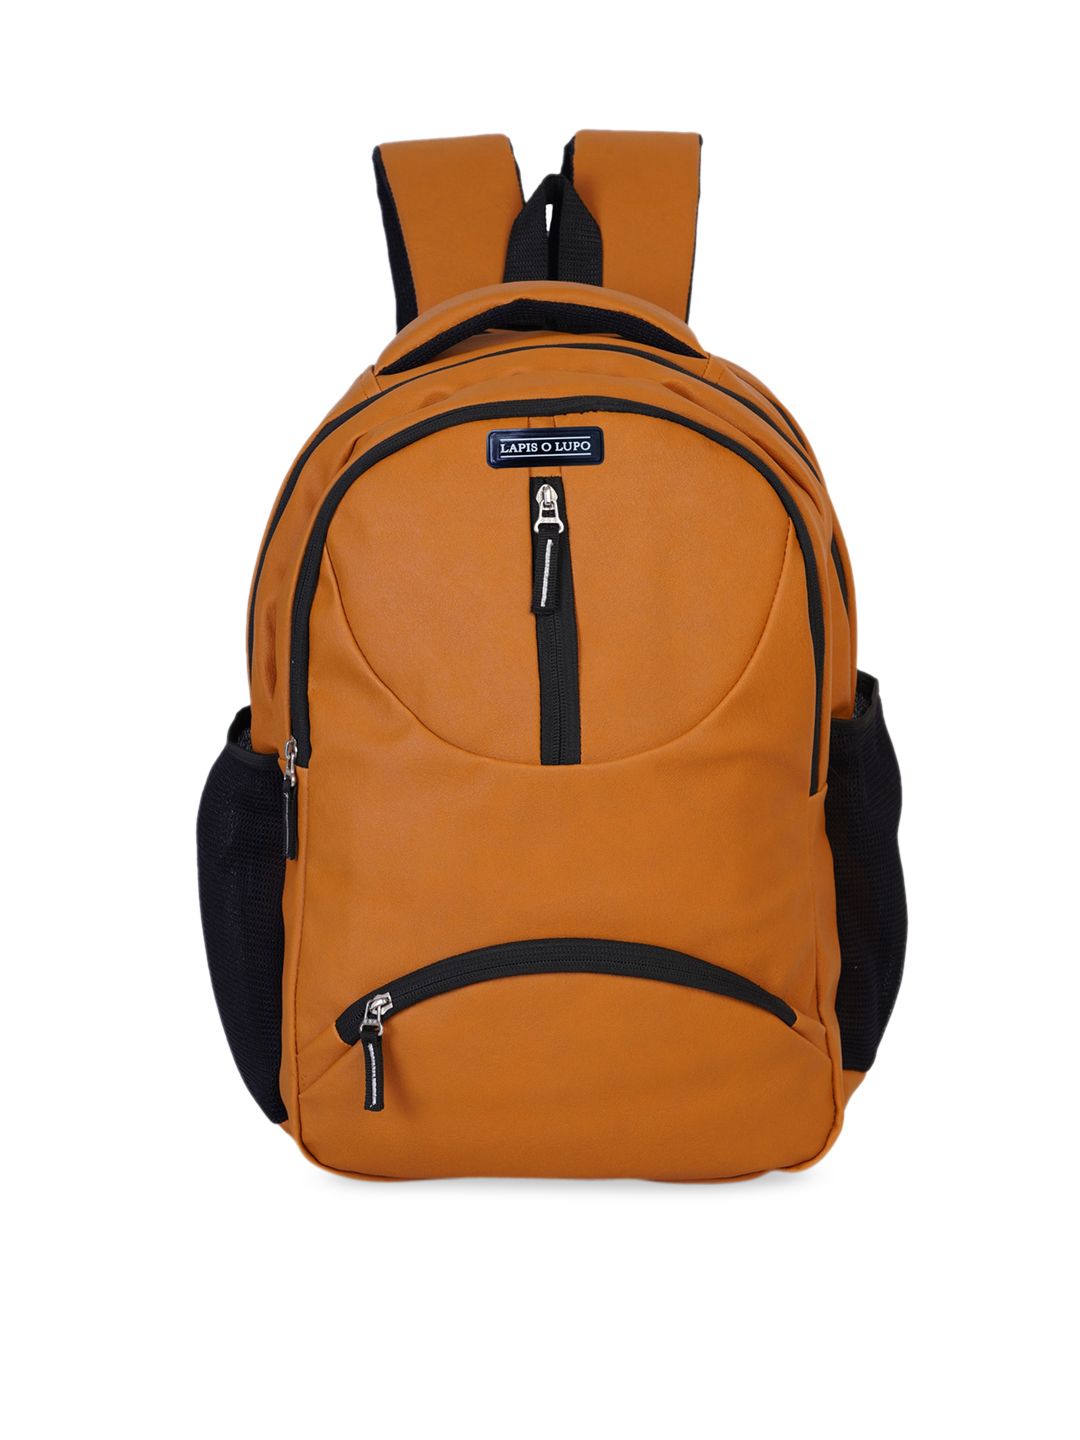 Lapis O Lupo Unisex Mustard & Black Solid Backpack Price in India